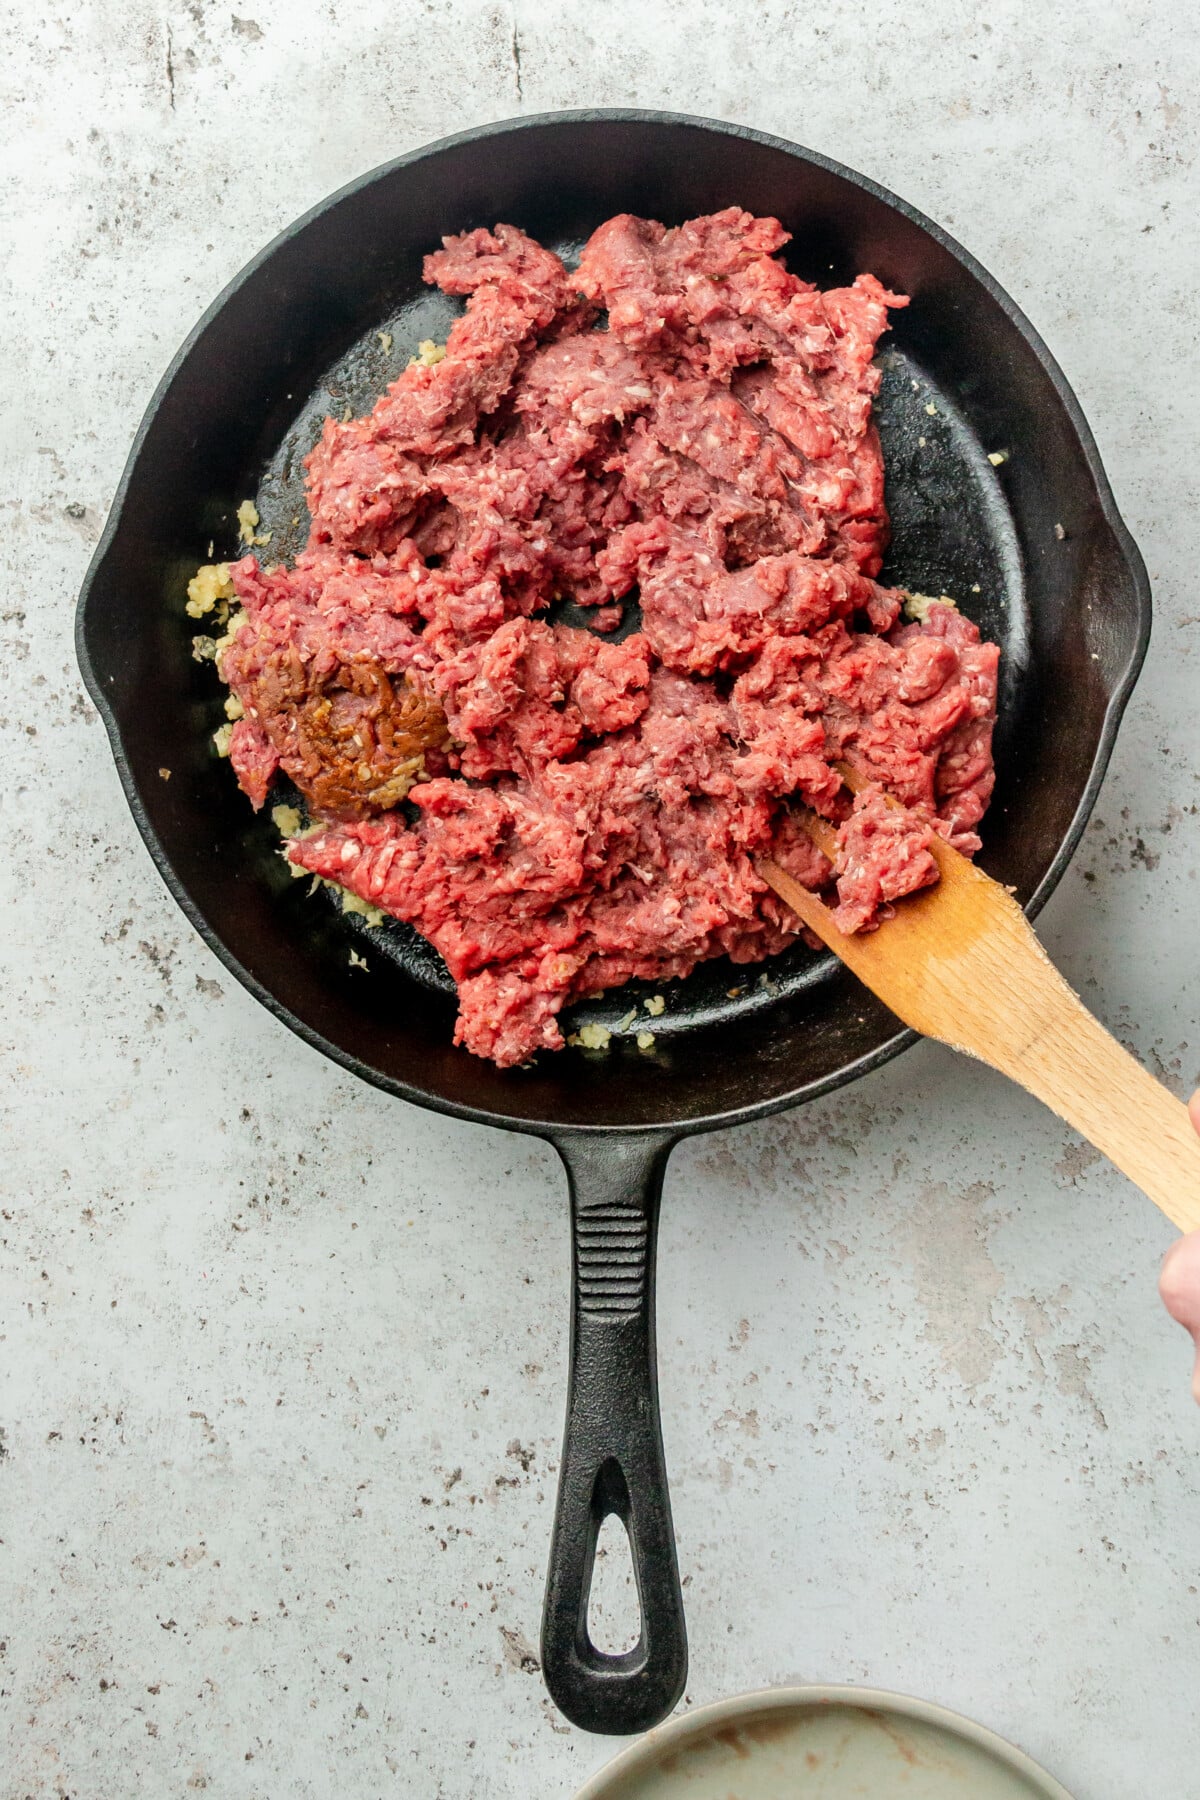 Minced beef is stirred in a cast iron skillet on a light grey colored surface.